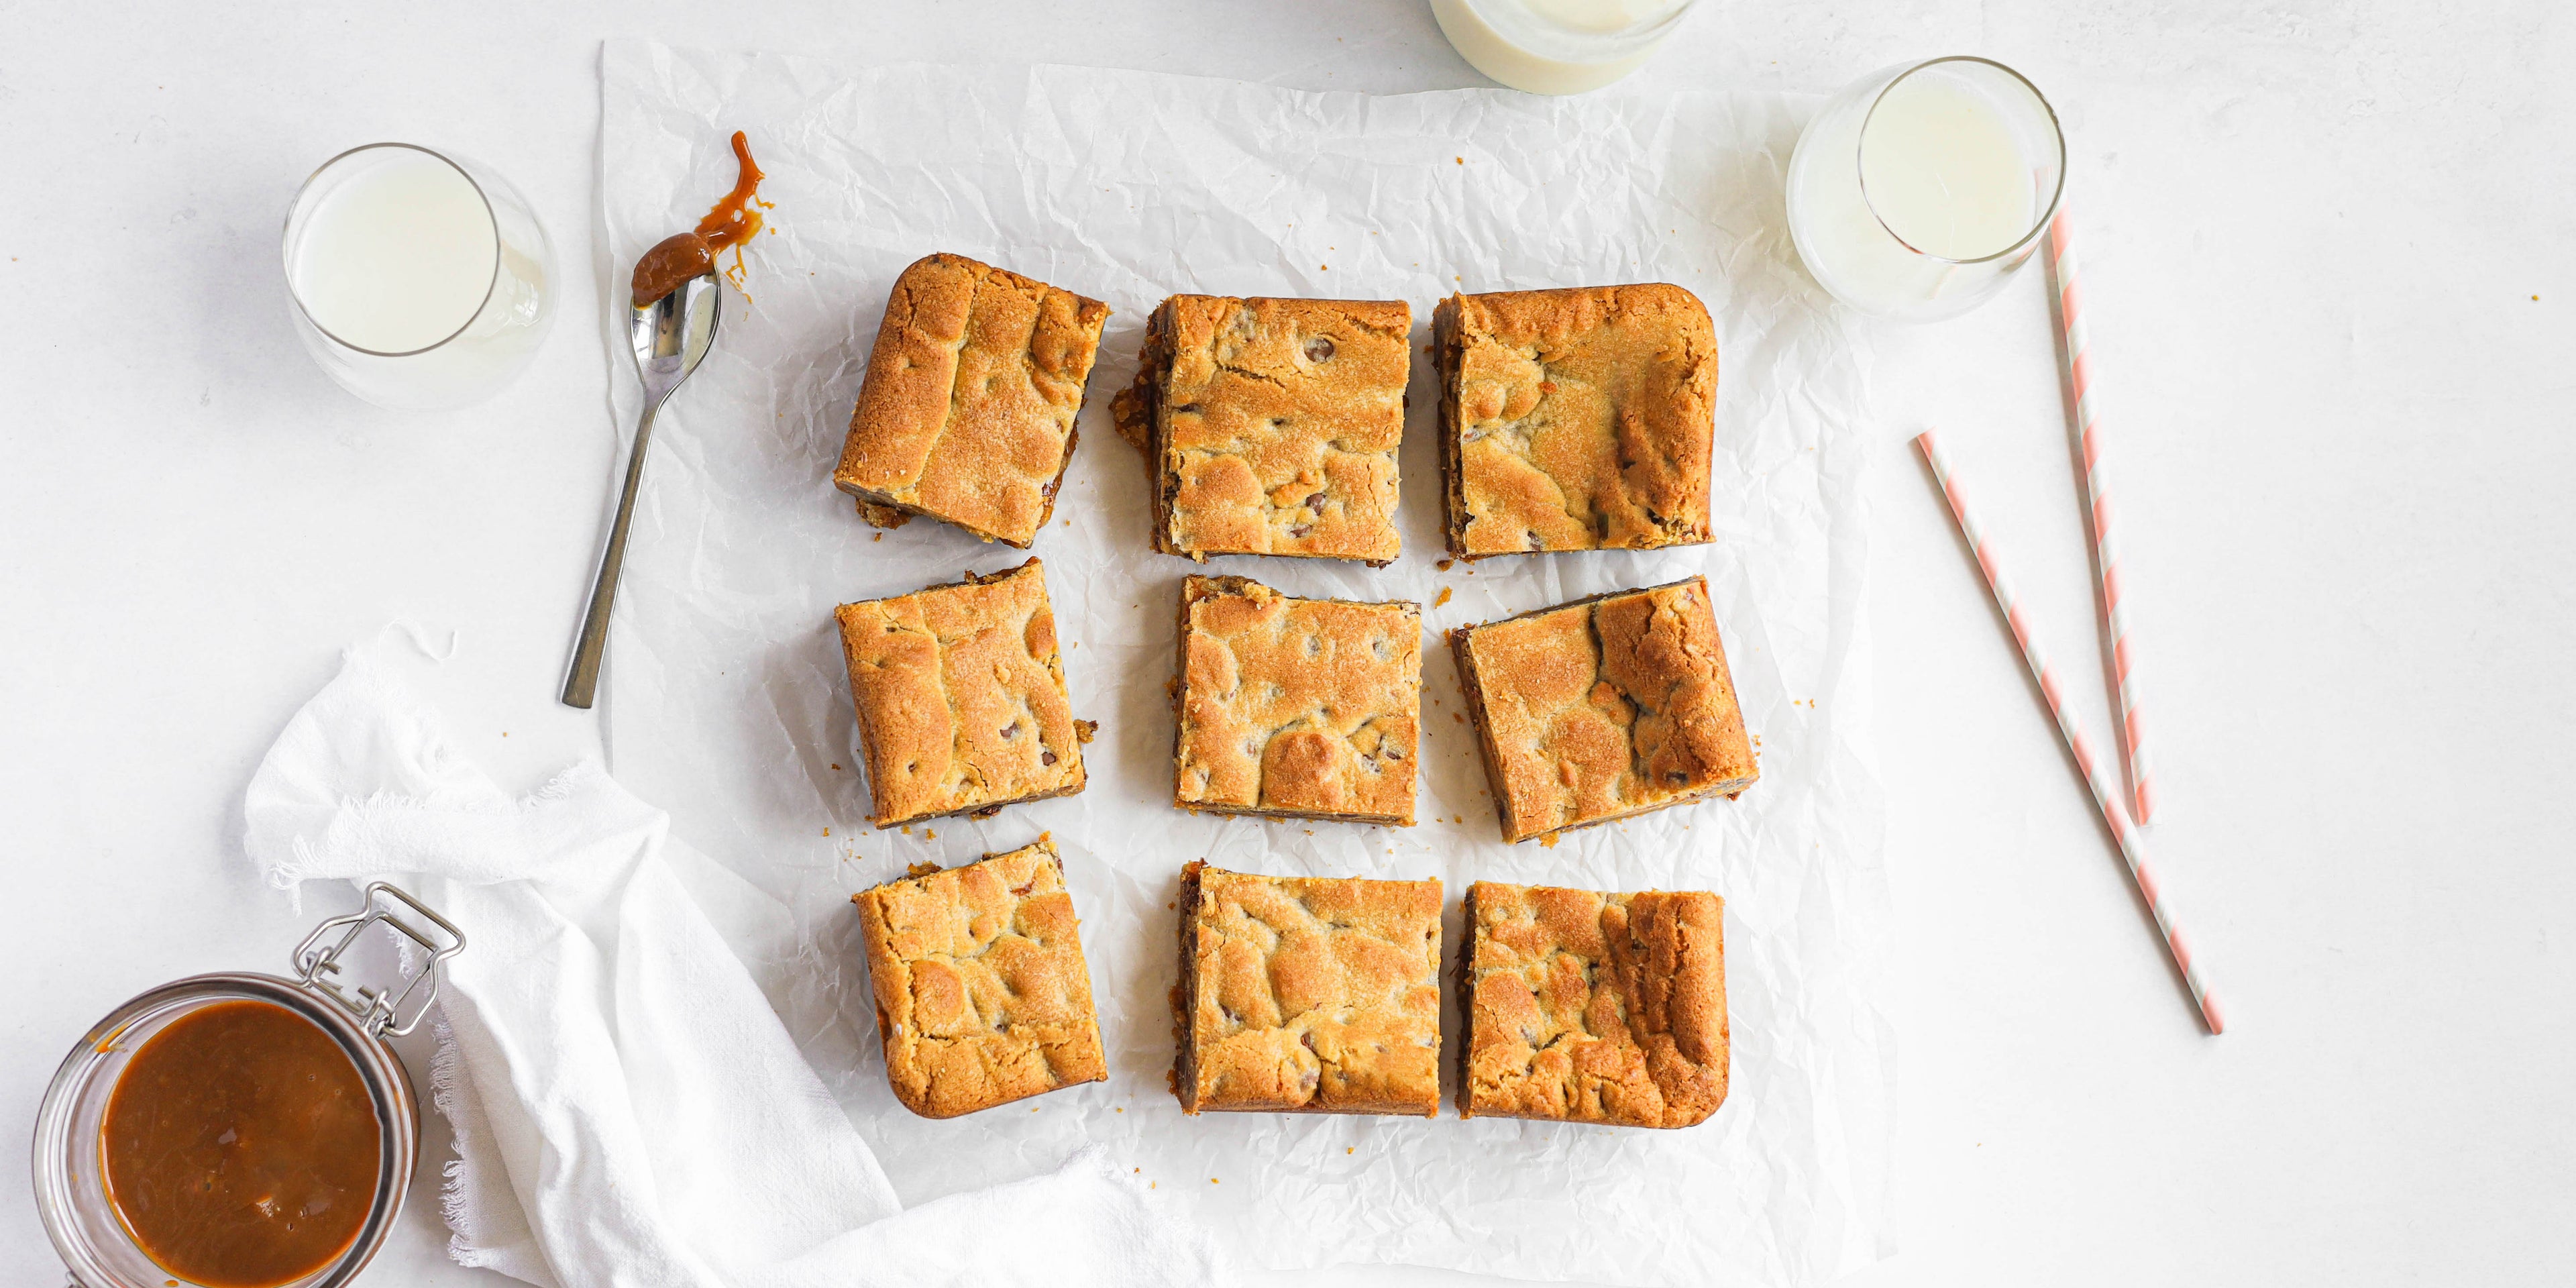 Salted Caramel Cookie Traybake cut into squares and lay on baking paper, next to a spoon with caramel sauce and glasses of milk